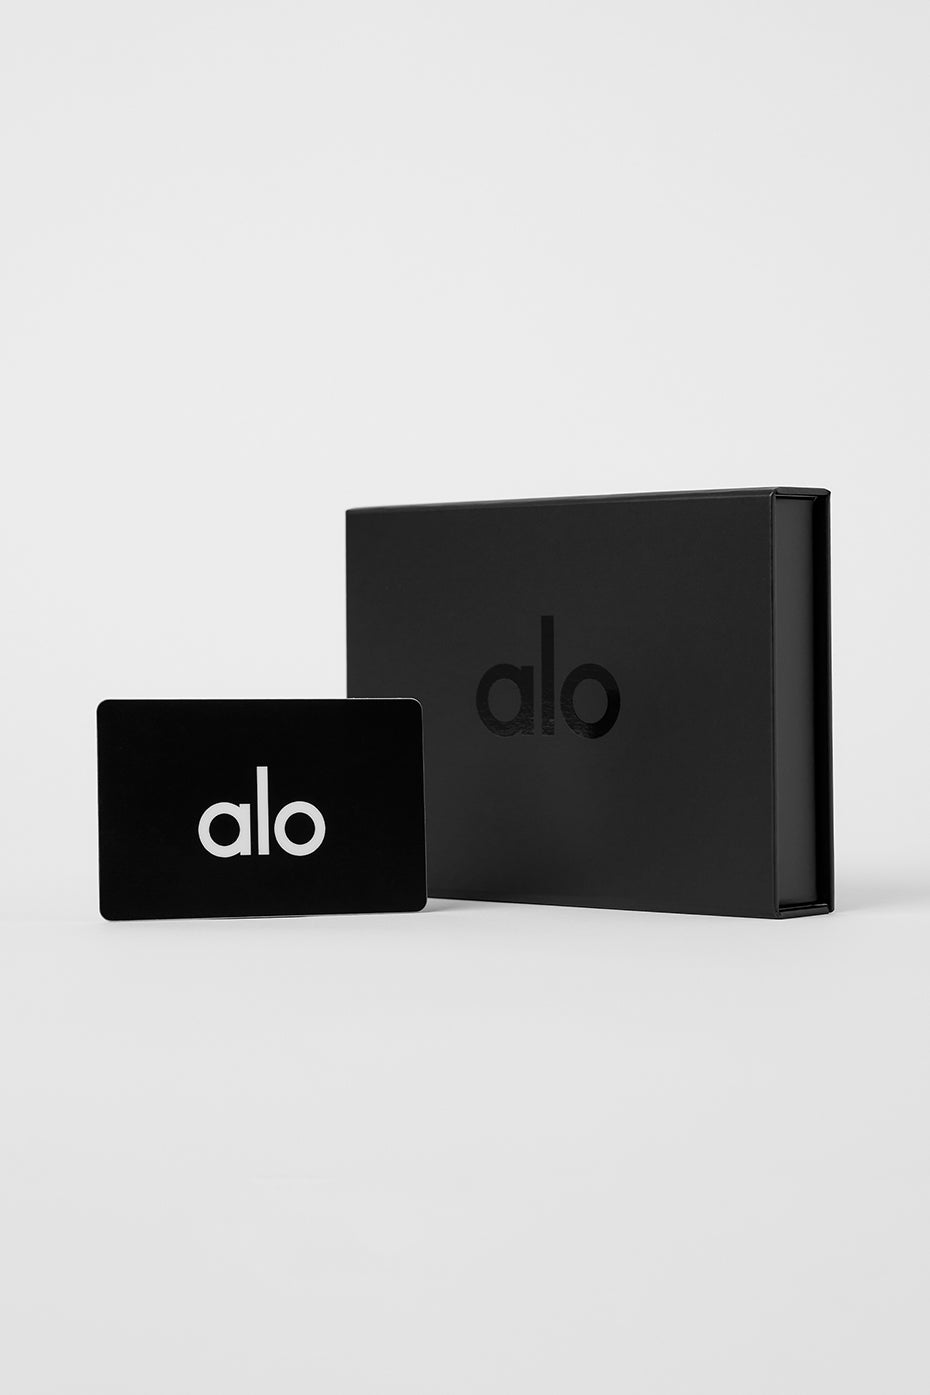 Alo Physical Gift Card